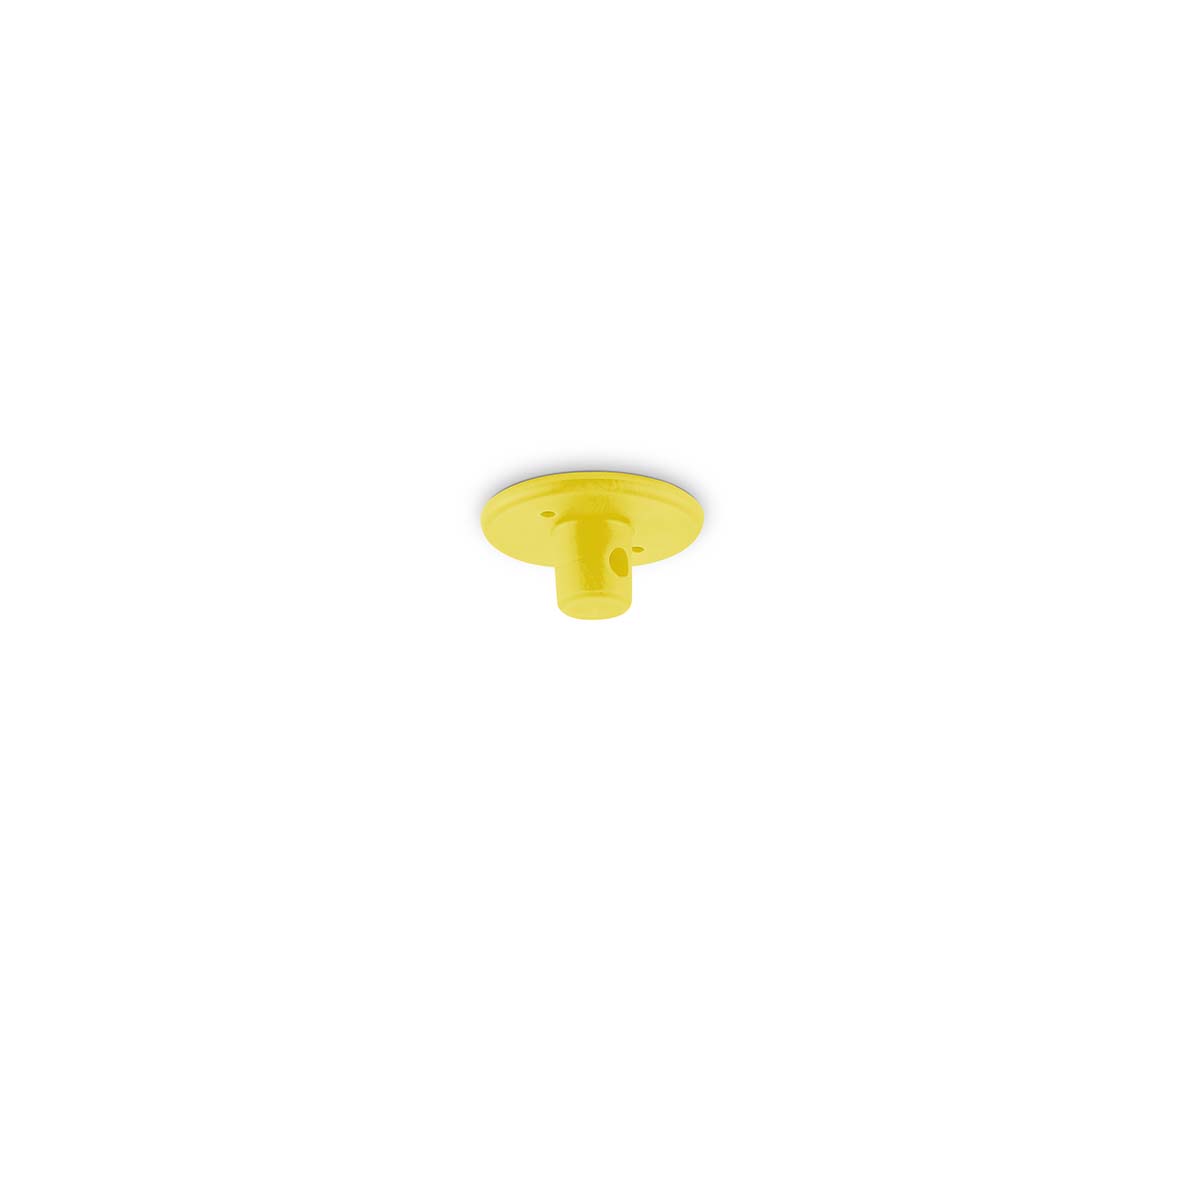 Tangla lighting - TLHG003YE - Silicone cable hanger - mix and match - yellow